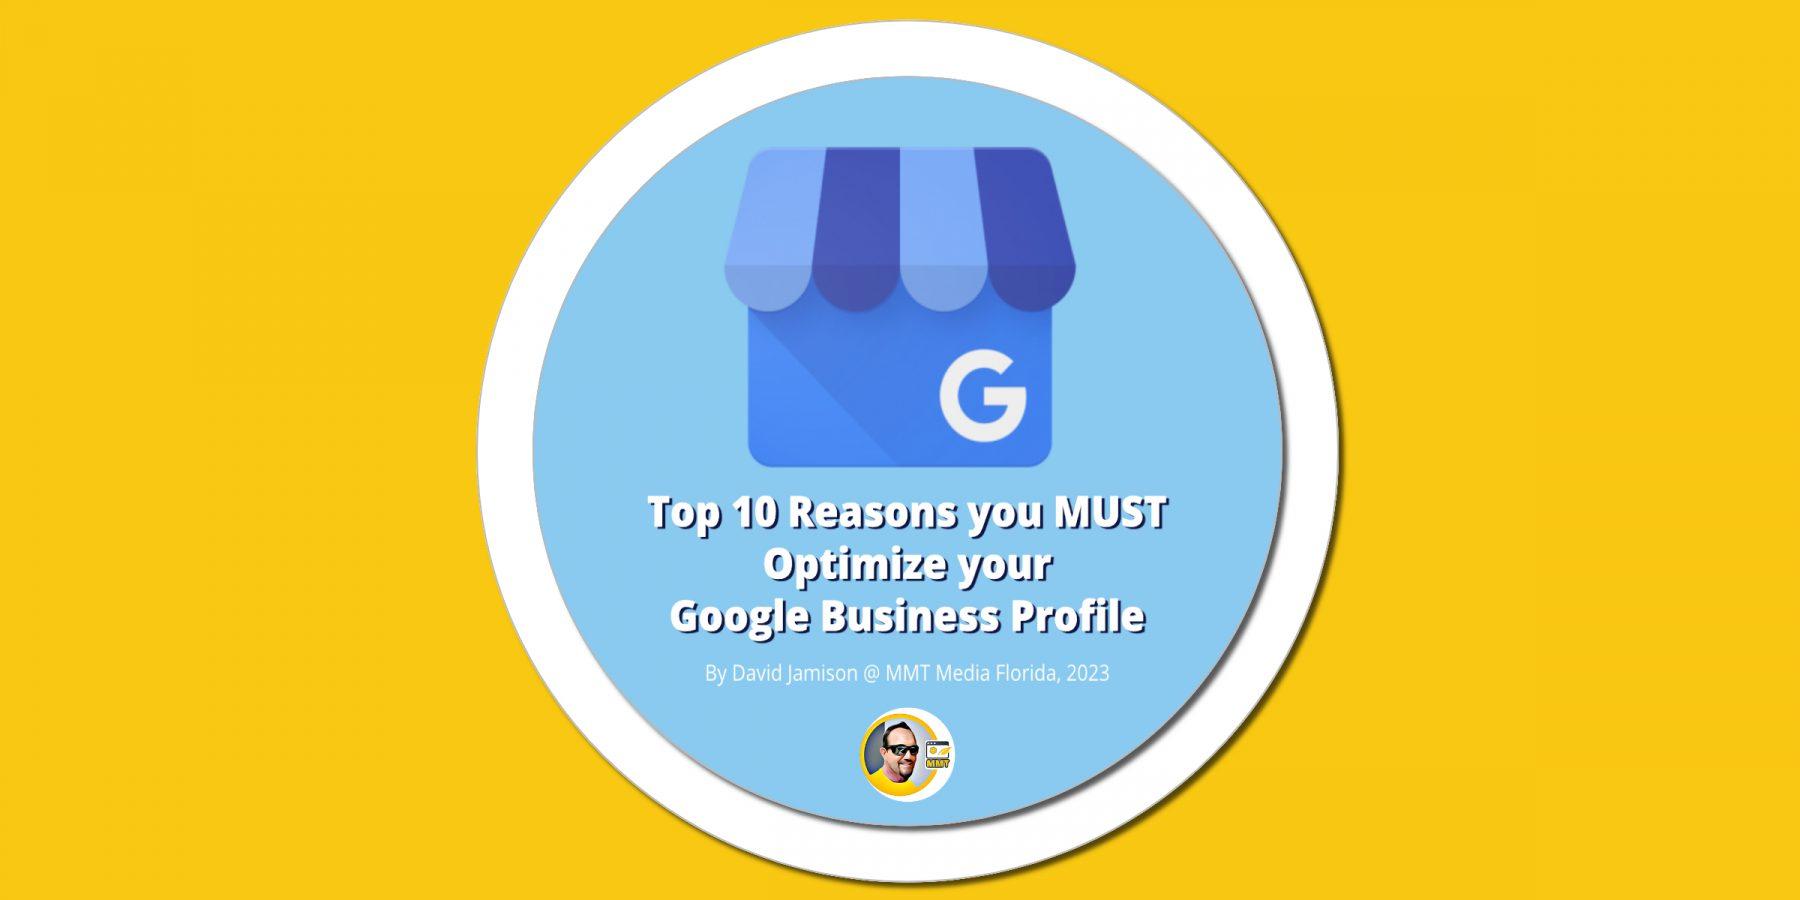 Top 10 Reasons you MUST Optimize your Google Business Profile